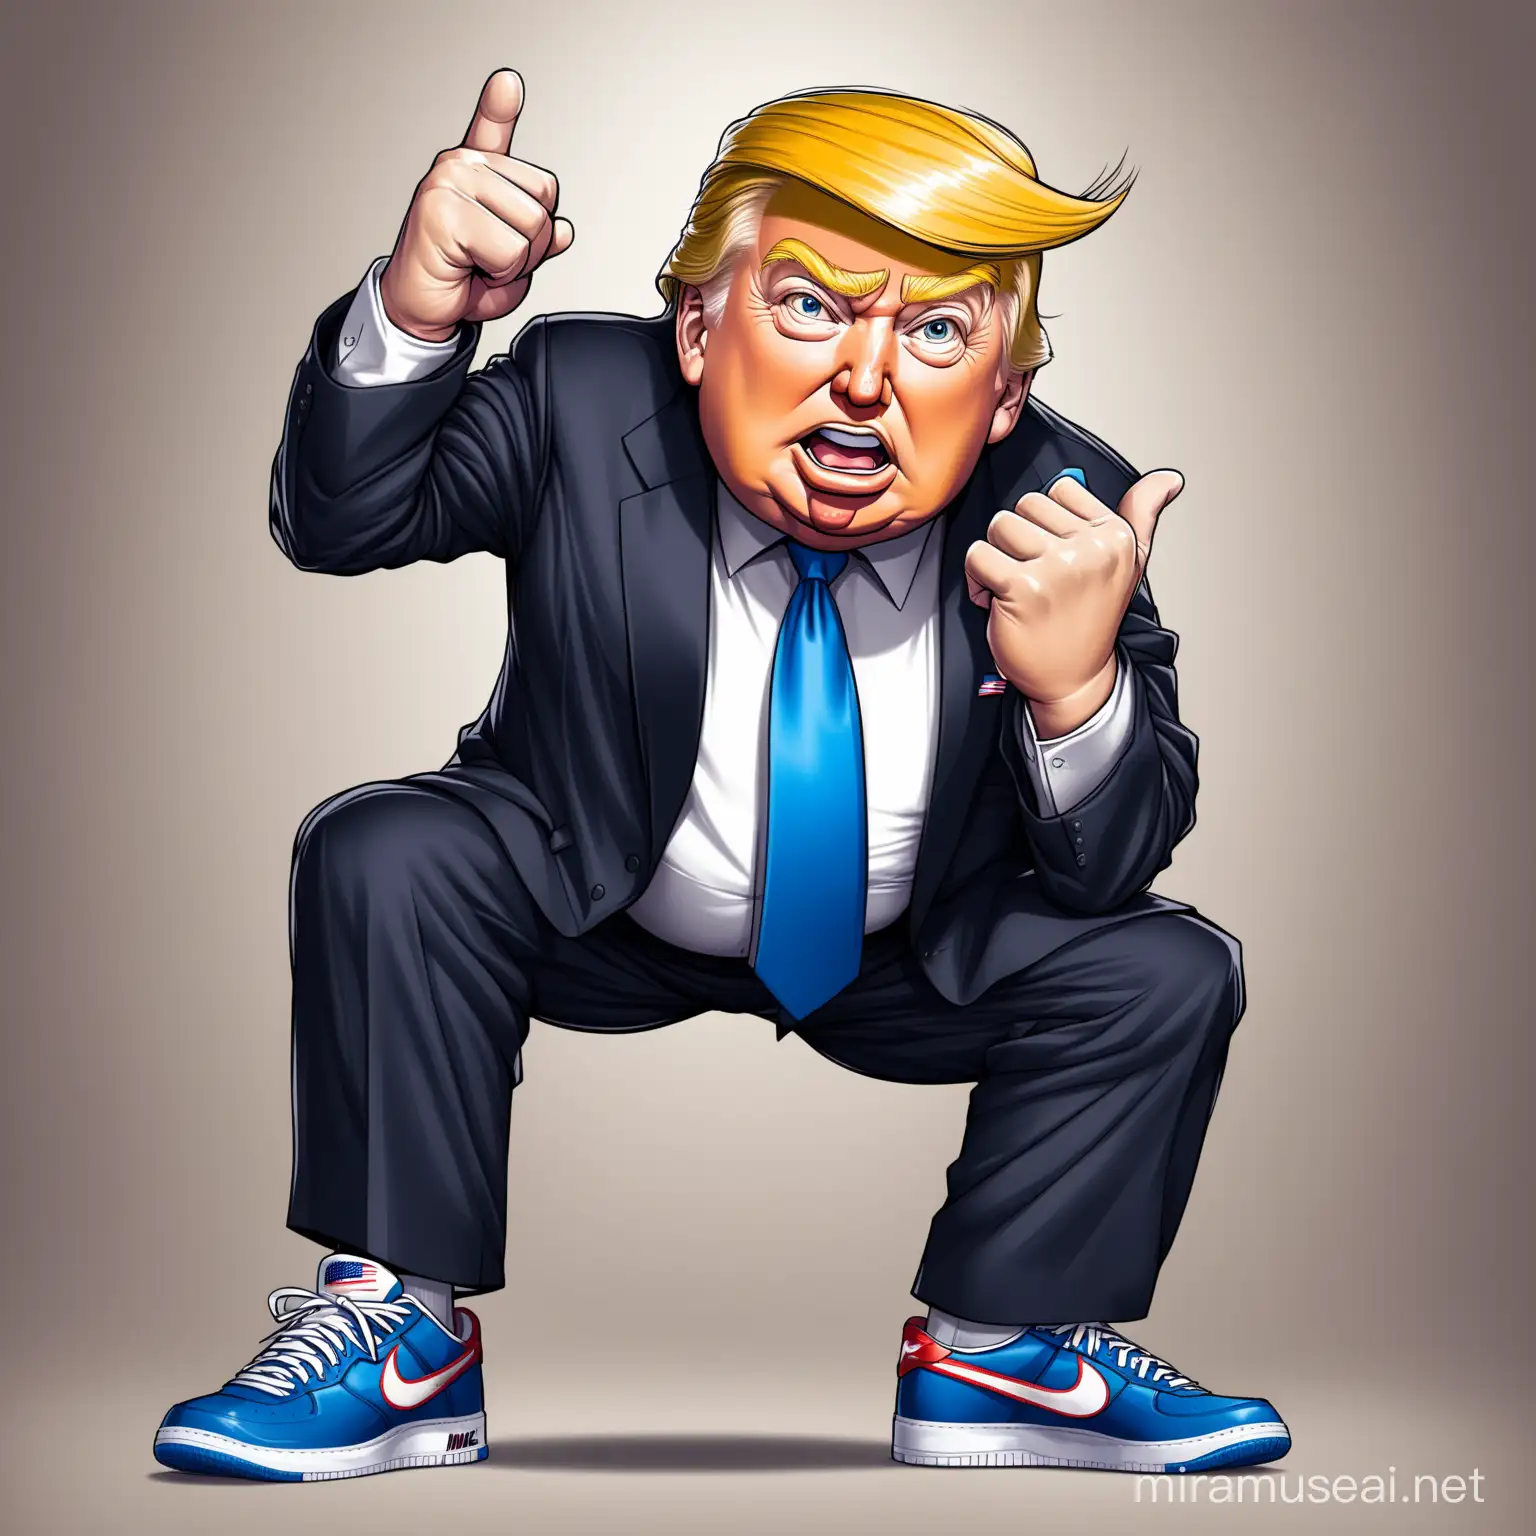 4k Funny Donald Trump in Nike Sneakers win election day 2024